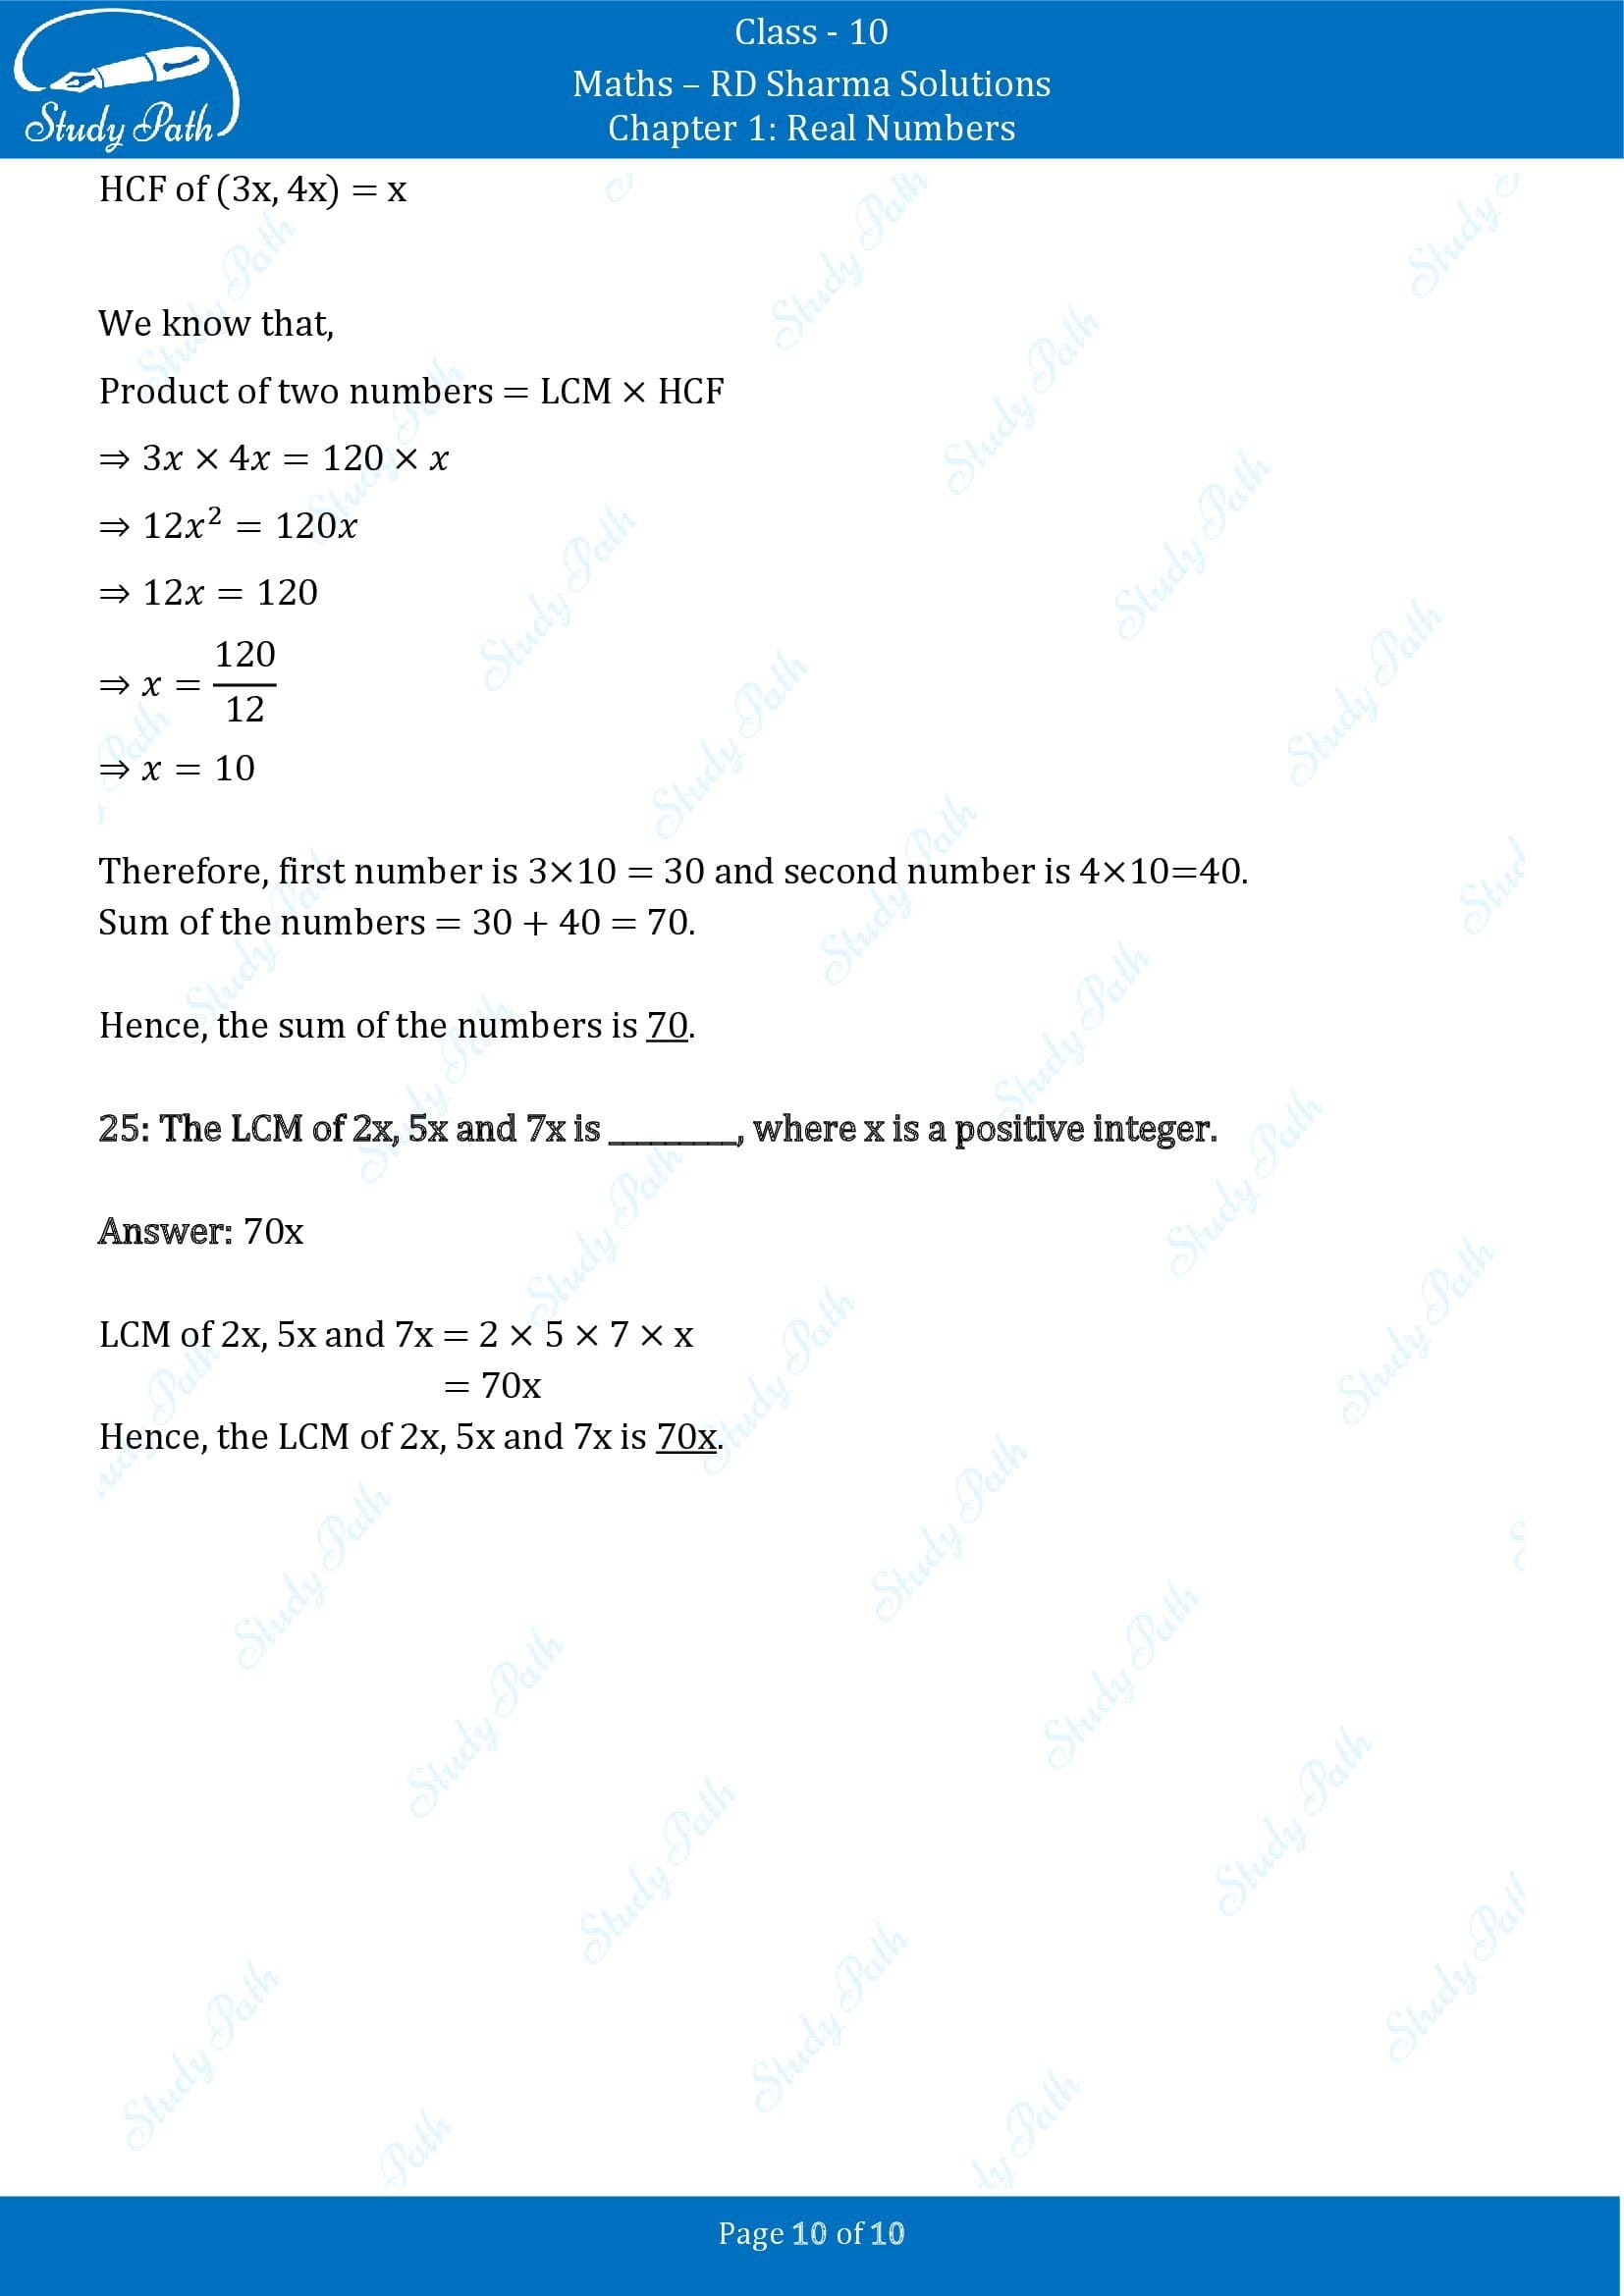 RD Sharma Solutions Class 10 Chapter 1 Real Numbers Fill in the Blank Type Questions FBQs 00010